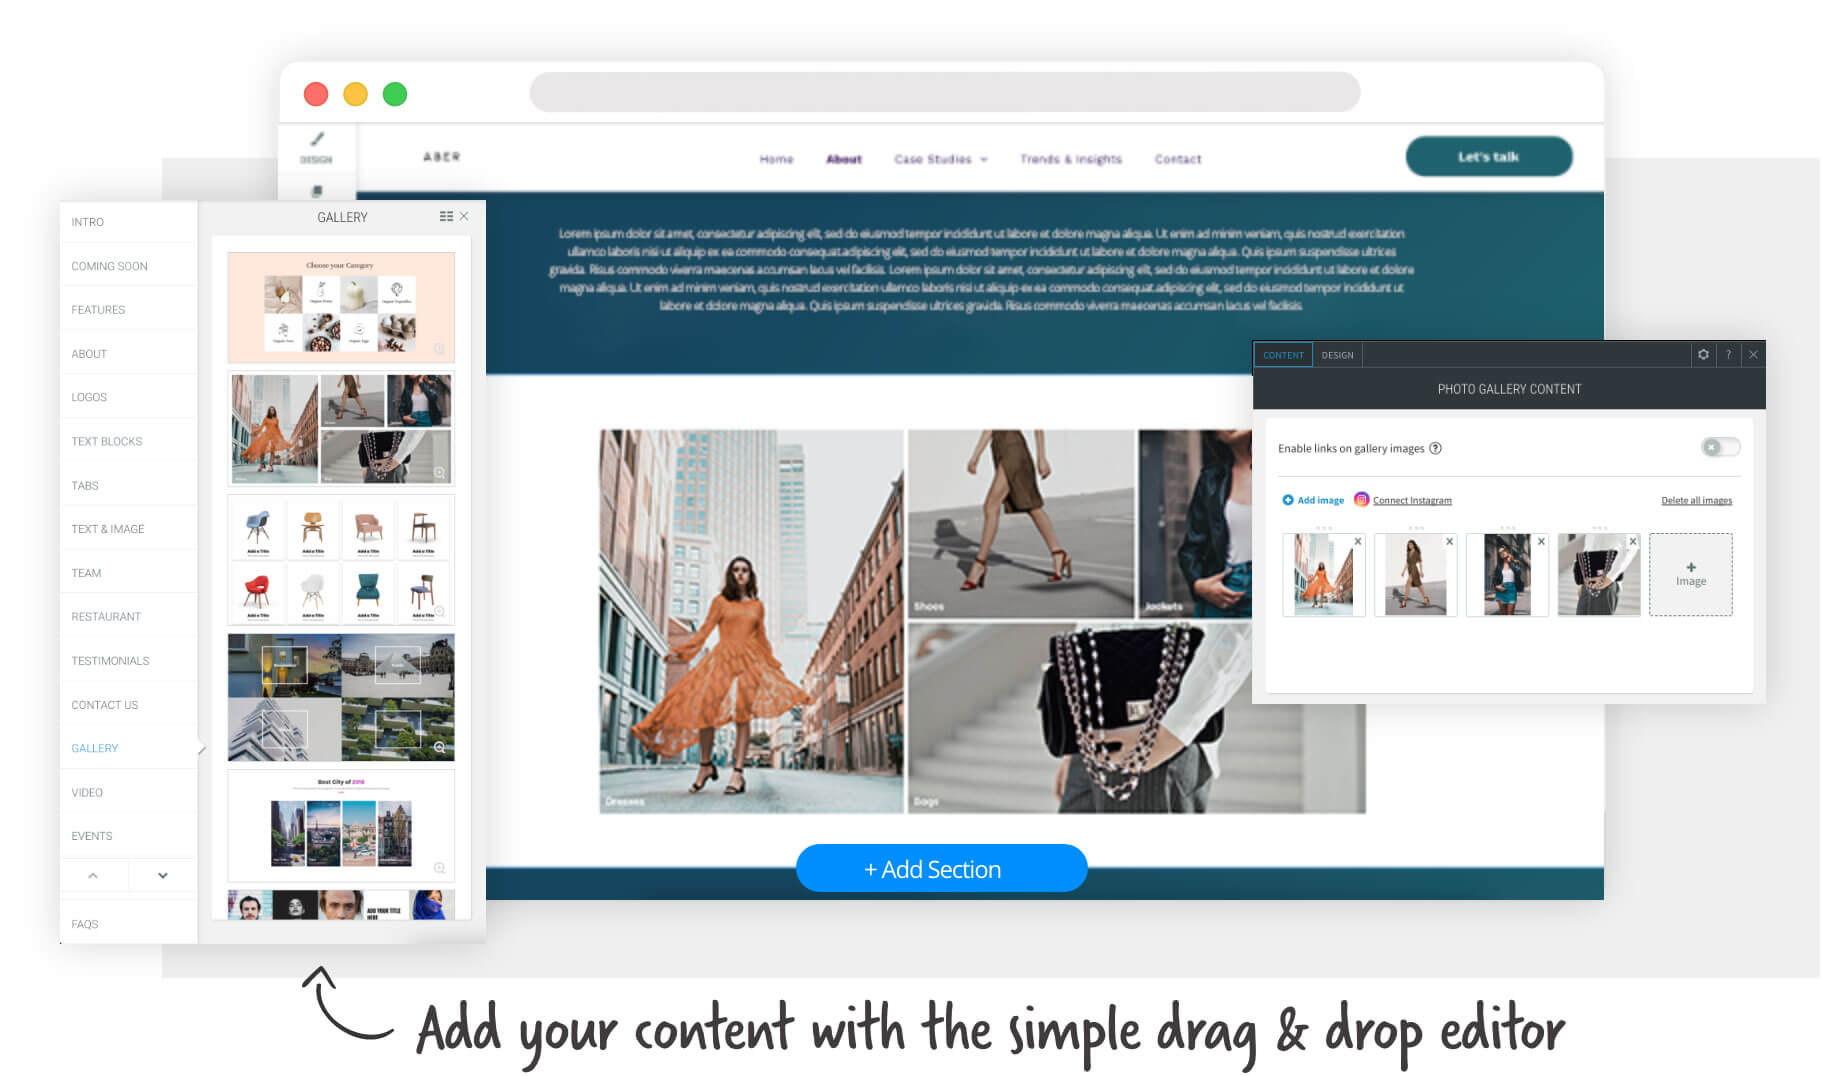 Add your content with the simple drag & drop editor